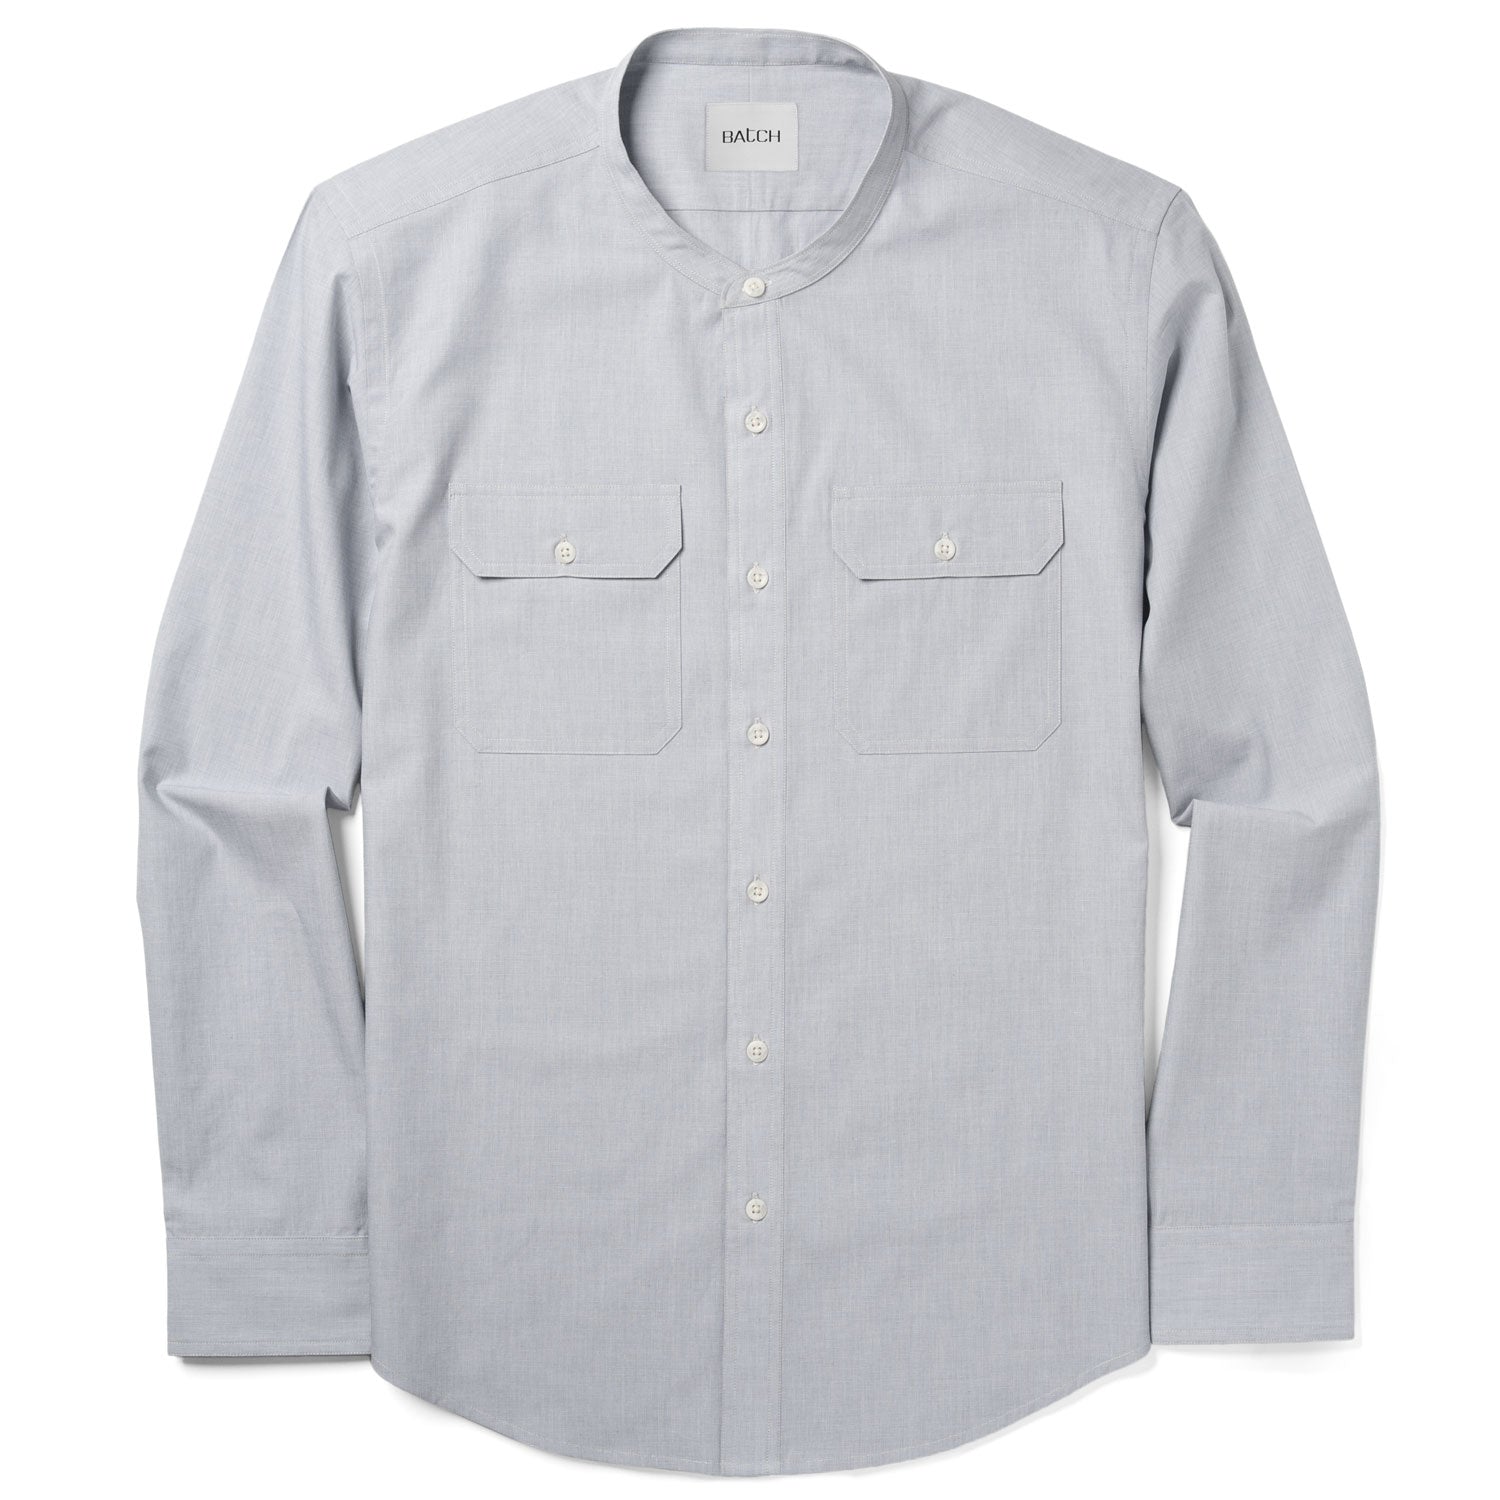 Constructor Band Collar Utility Shirt – Aluminum Gray End-on-end